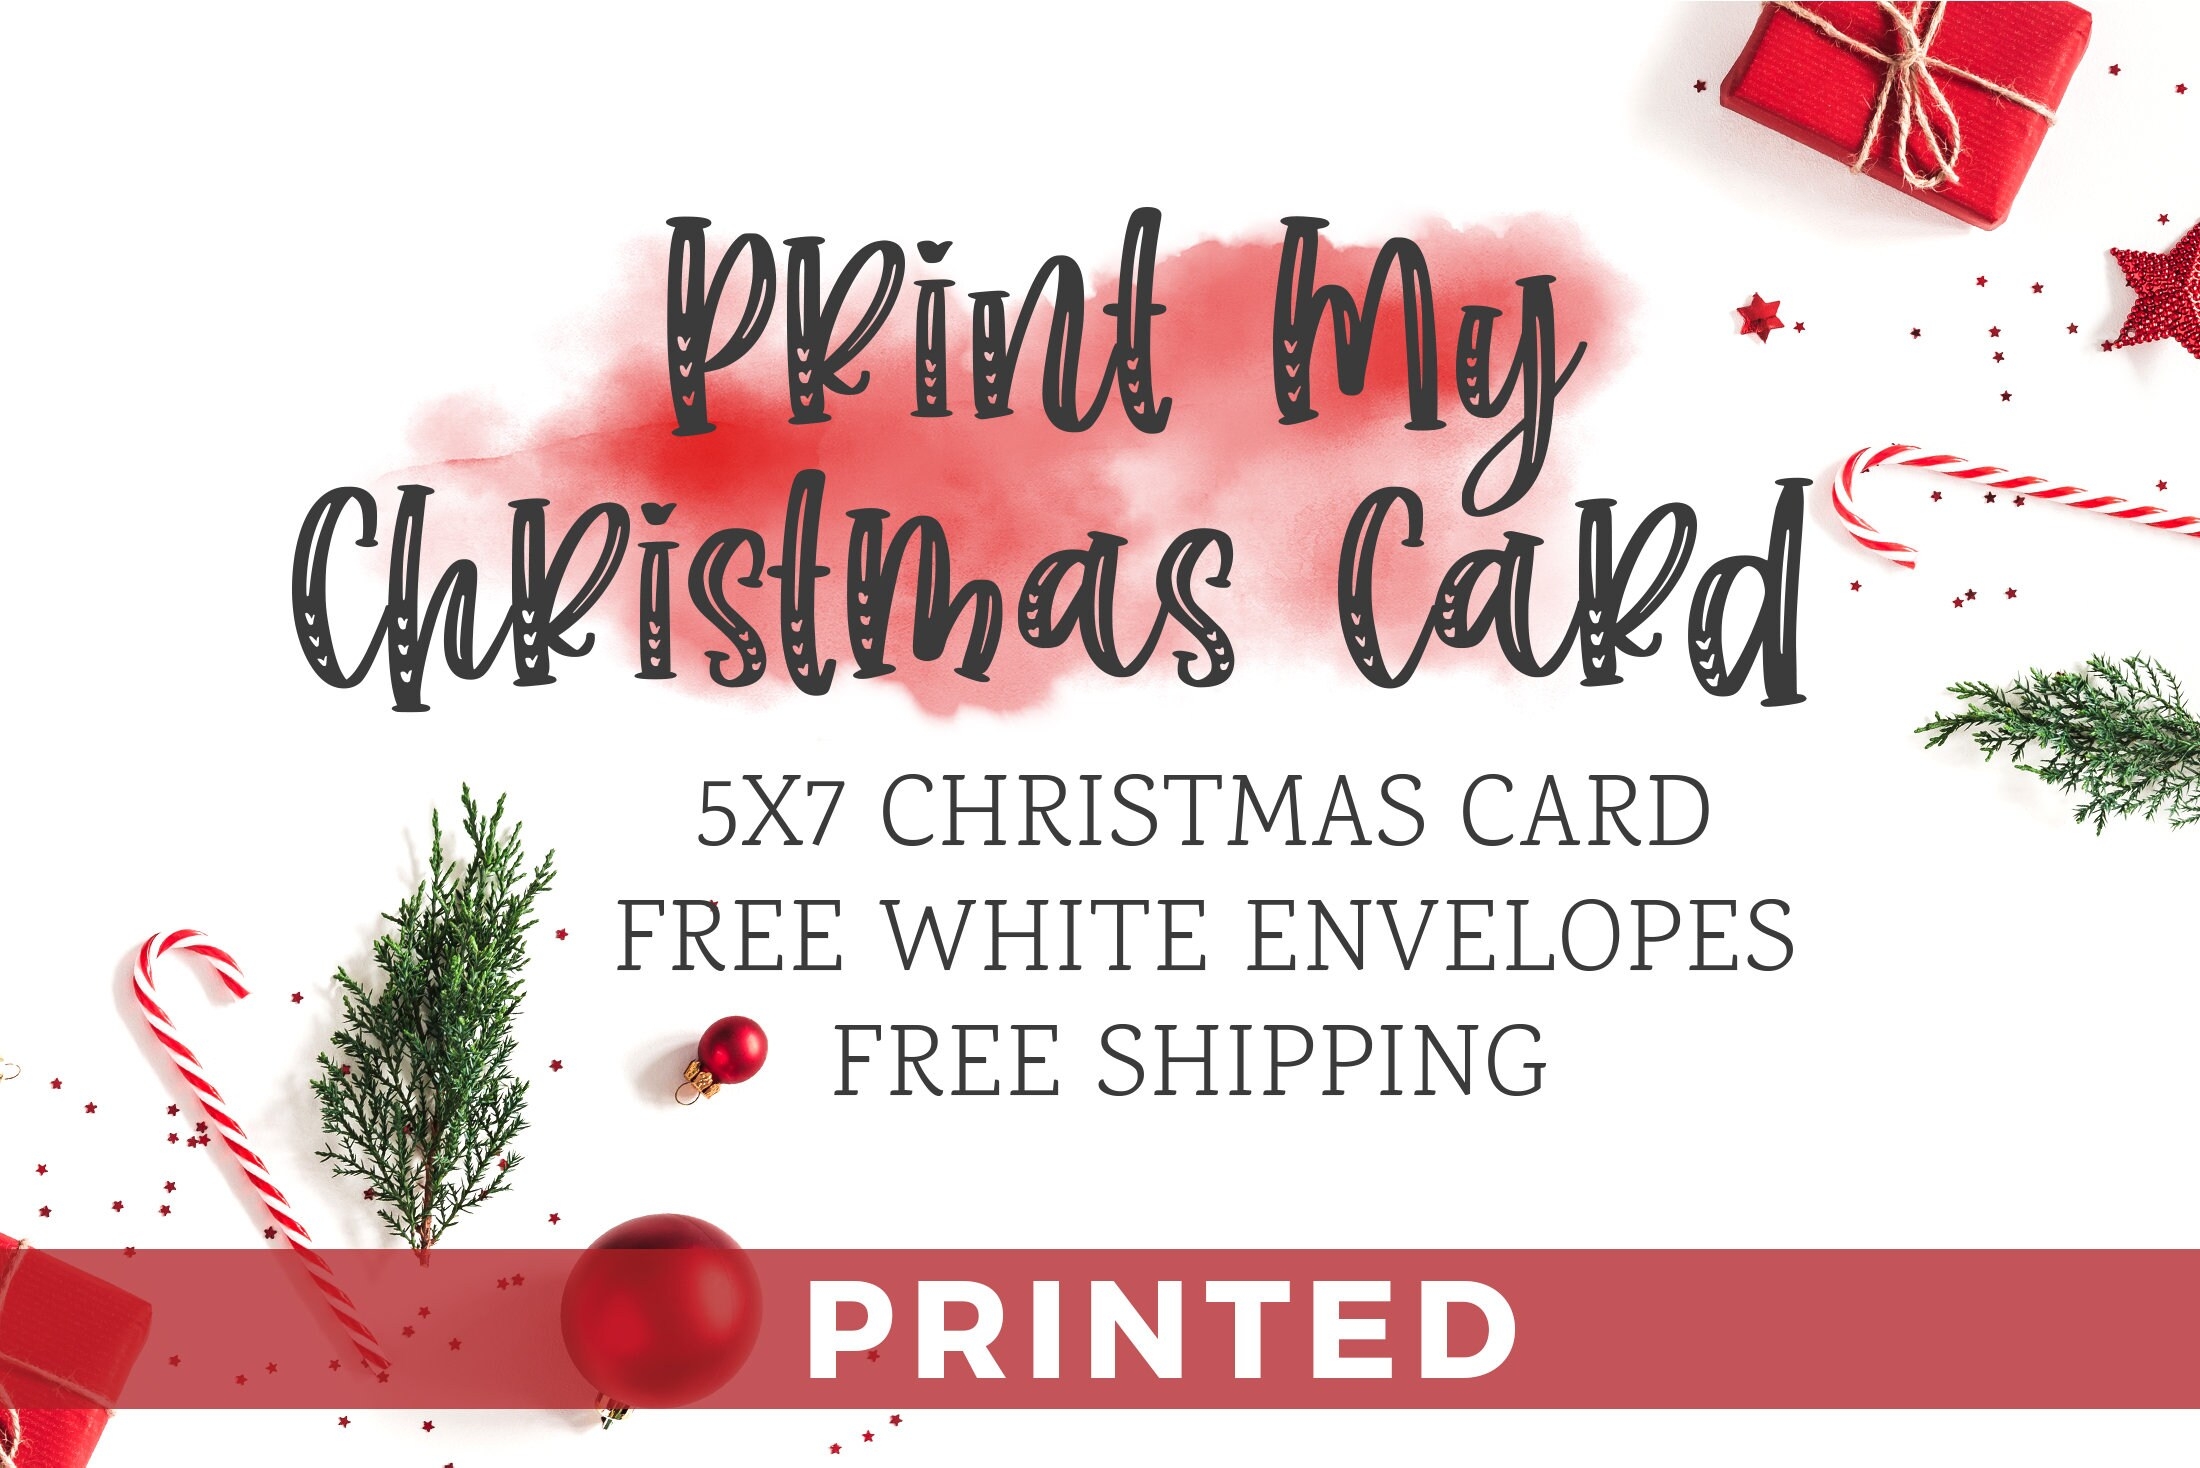 Christmas Card Printing 5x7 Holiday Greeting Cards Print Your Own Design FREE Envelopes 5x7 Christmas Card Printing Service Etsy - Free Printable Christmas Card Templates